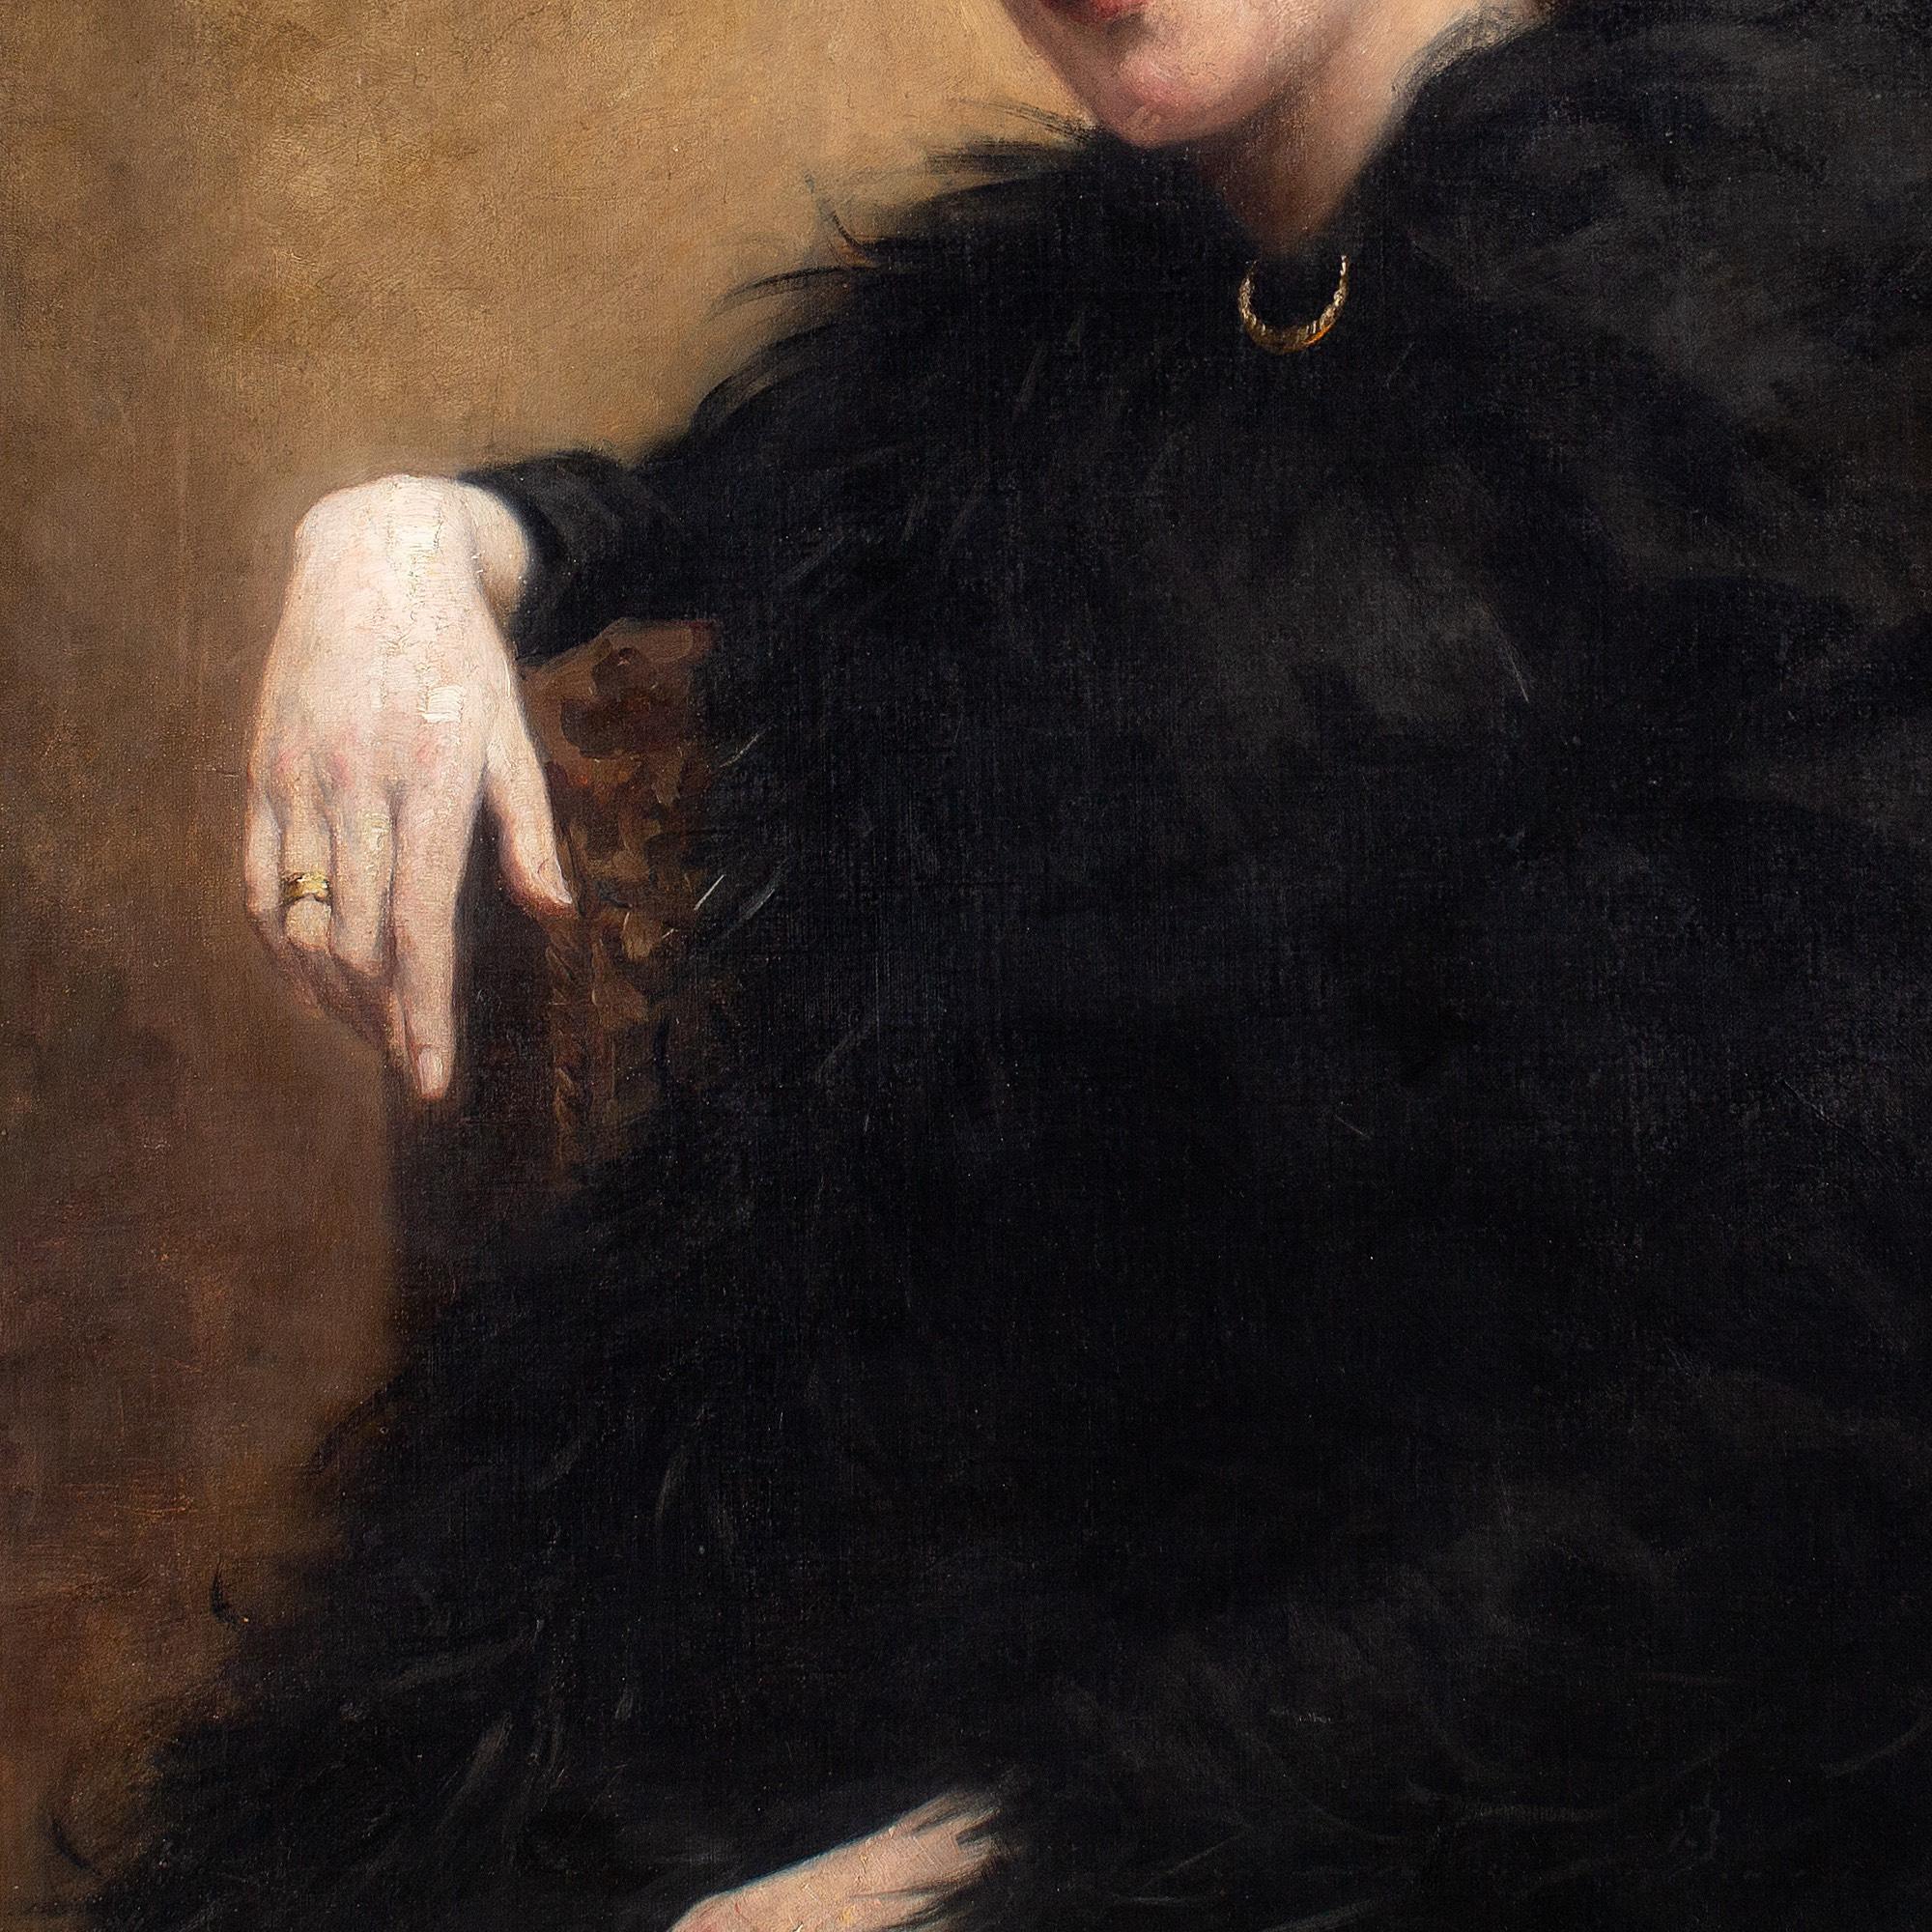 This beautiful late 19th-century Norwegian oil painting depicts a lady of means, probably a widow, dressed in black.

She’s emotionally bruised and bereaved, yet maintaining an air of high society elegance. Dressed entirely in black with sumptuous